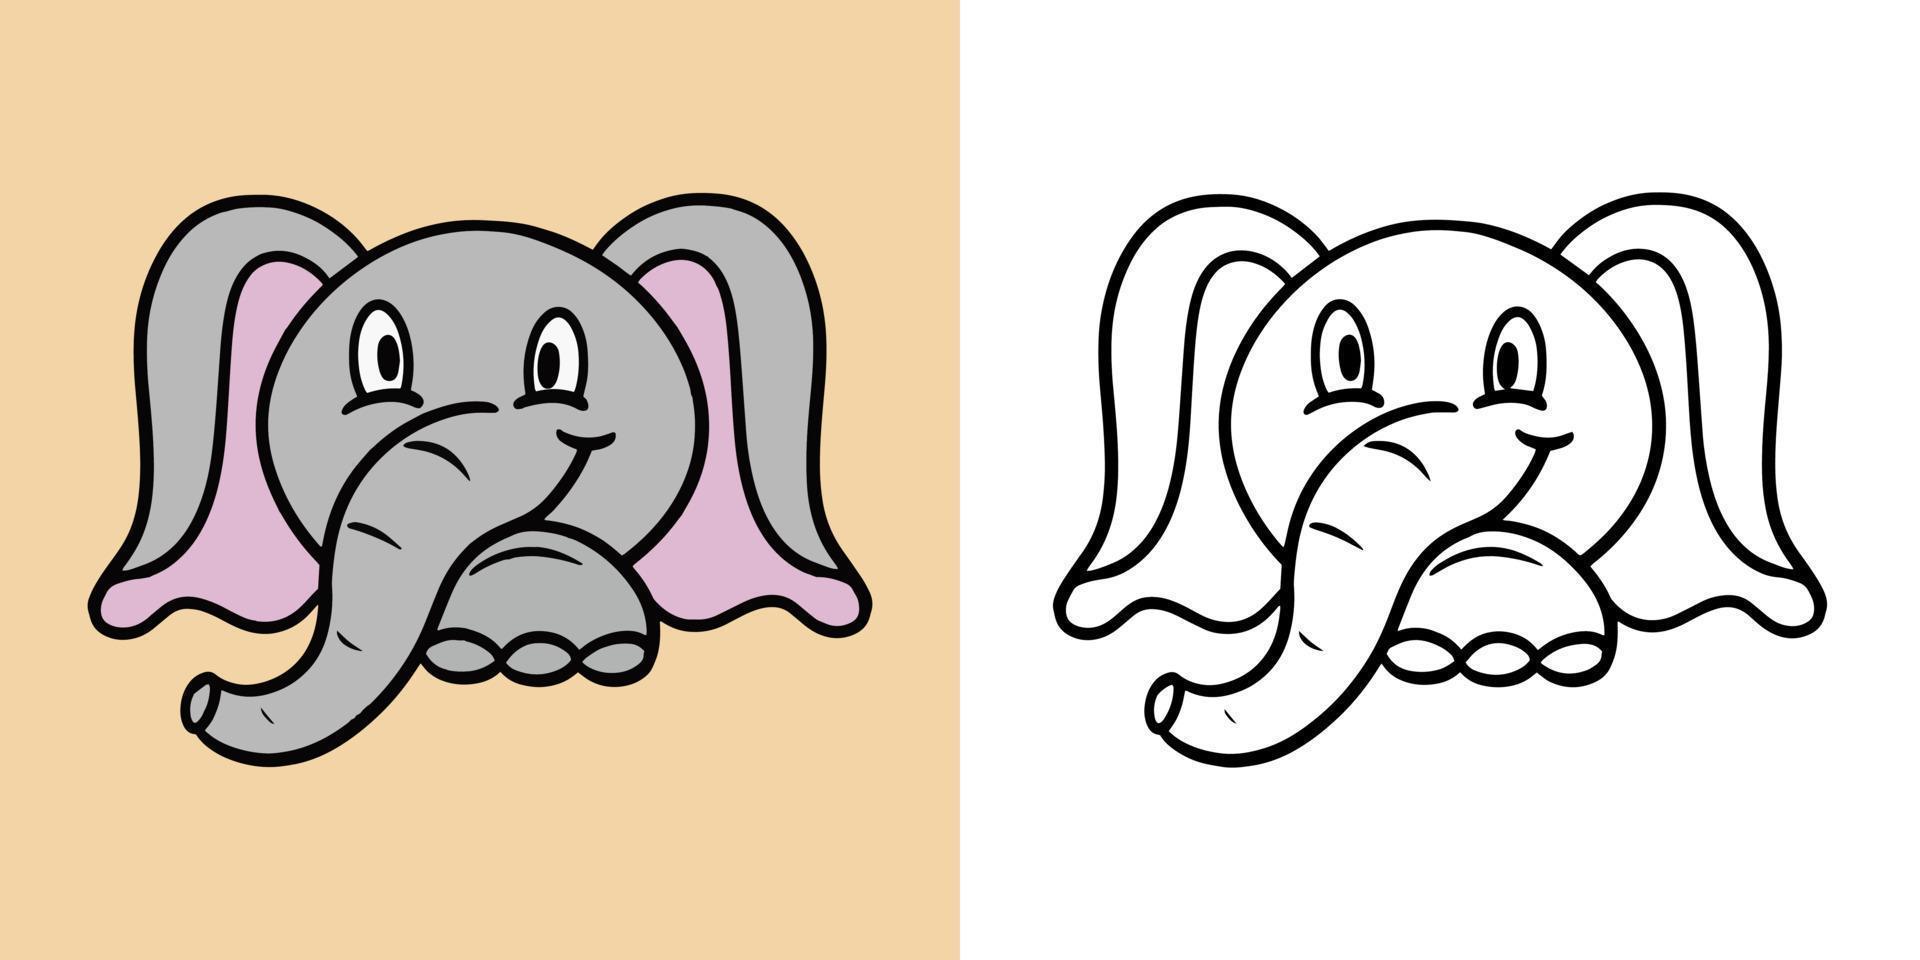 Horizontal set of illustrations for coloring books, Cute elephant smiles, cartoon style, vector illustration